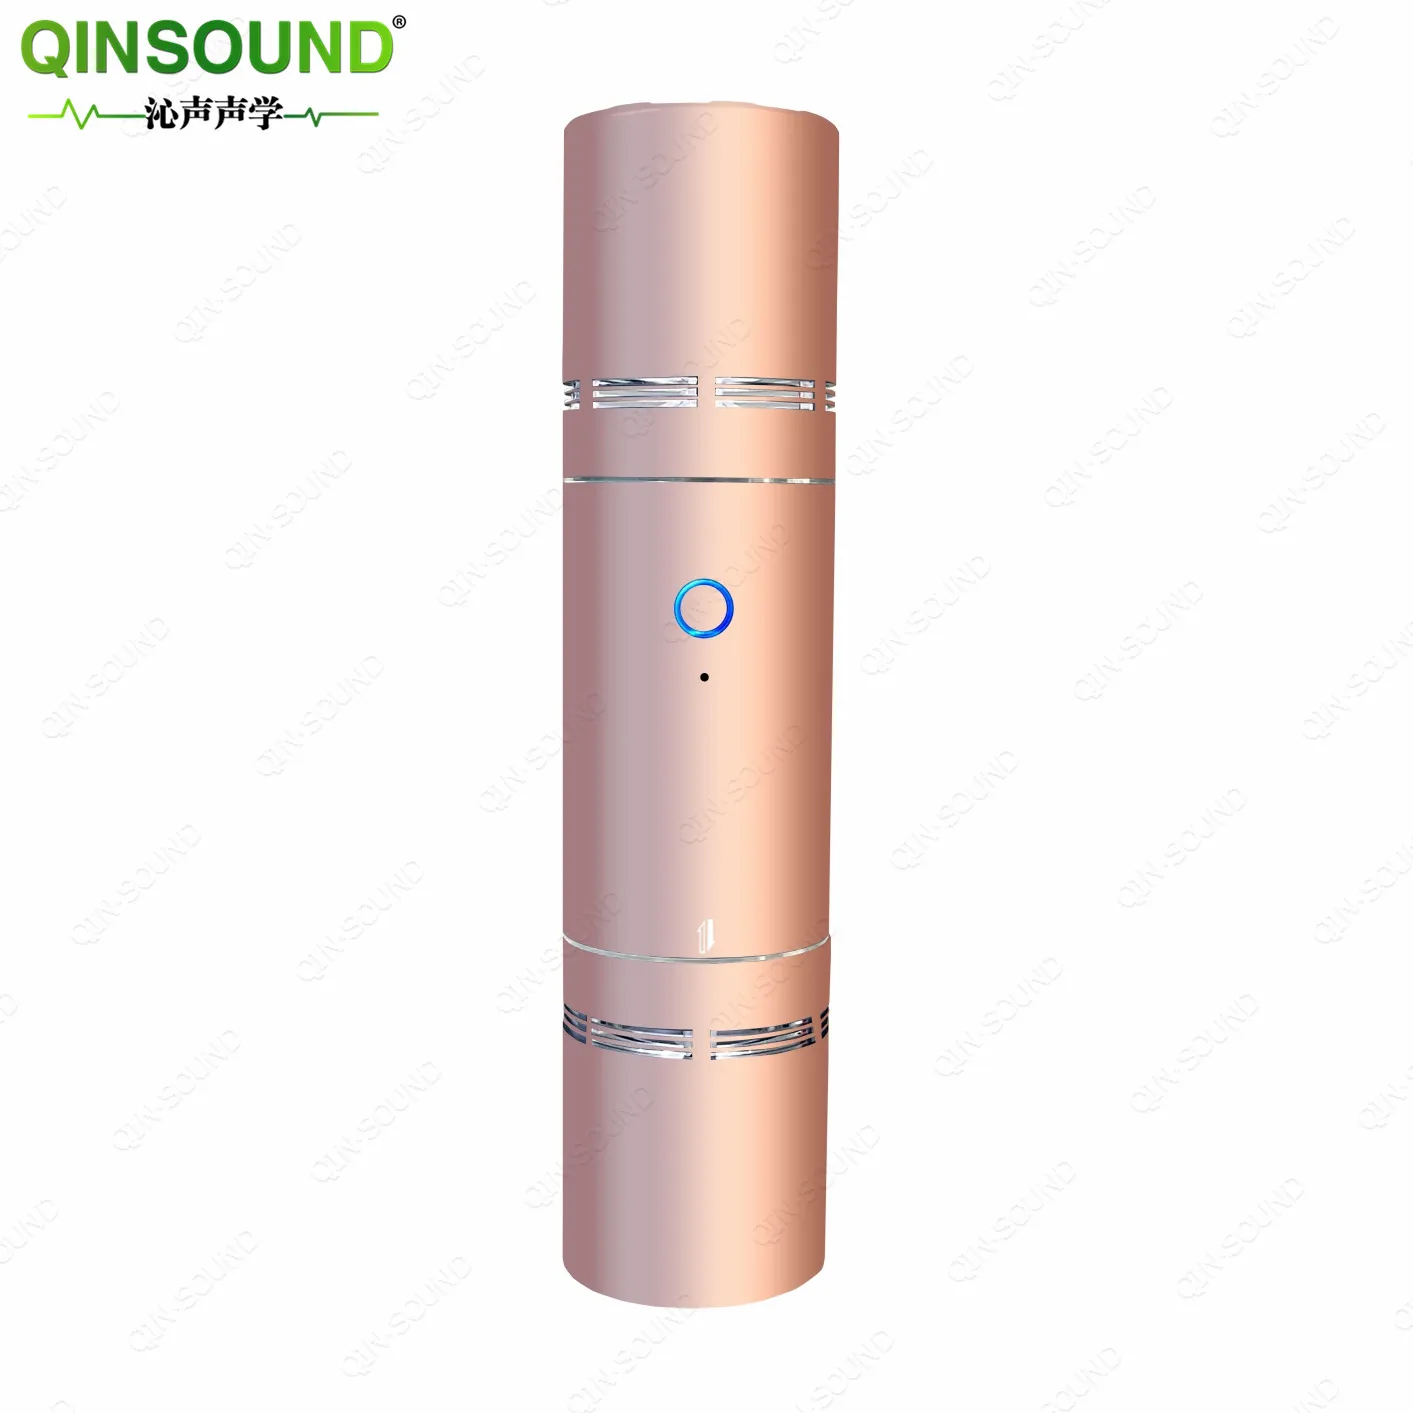 

Qinsound Multi-function Mini Speaker wire metal touch fashion appearance with scene light, Blue/ grey/ pink